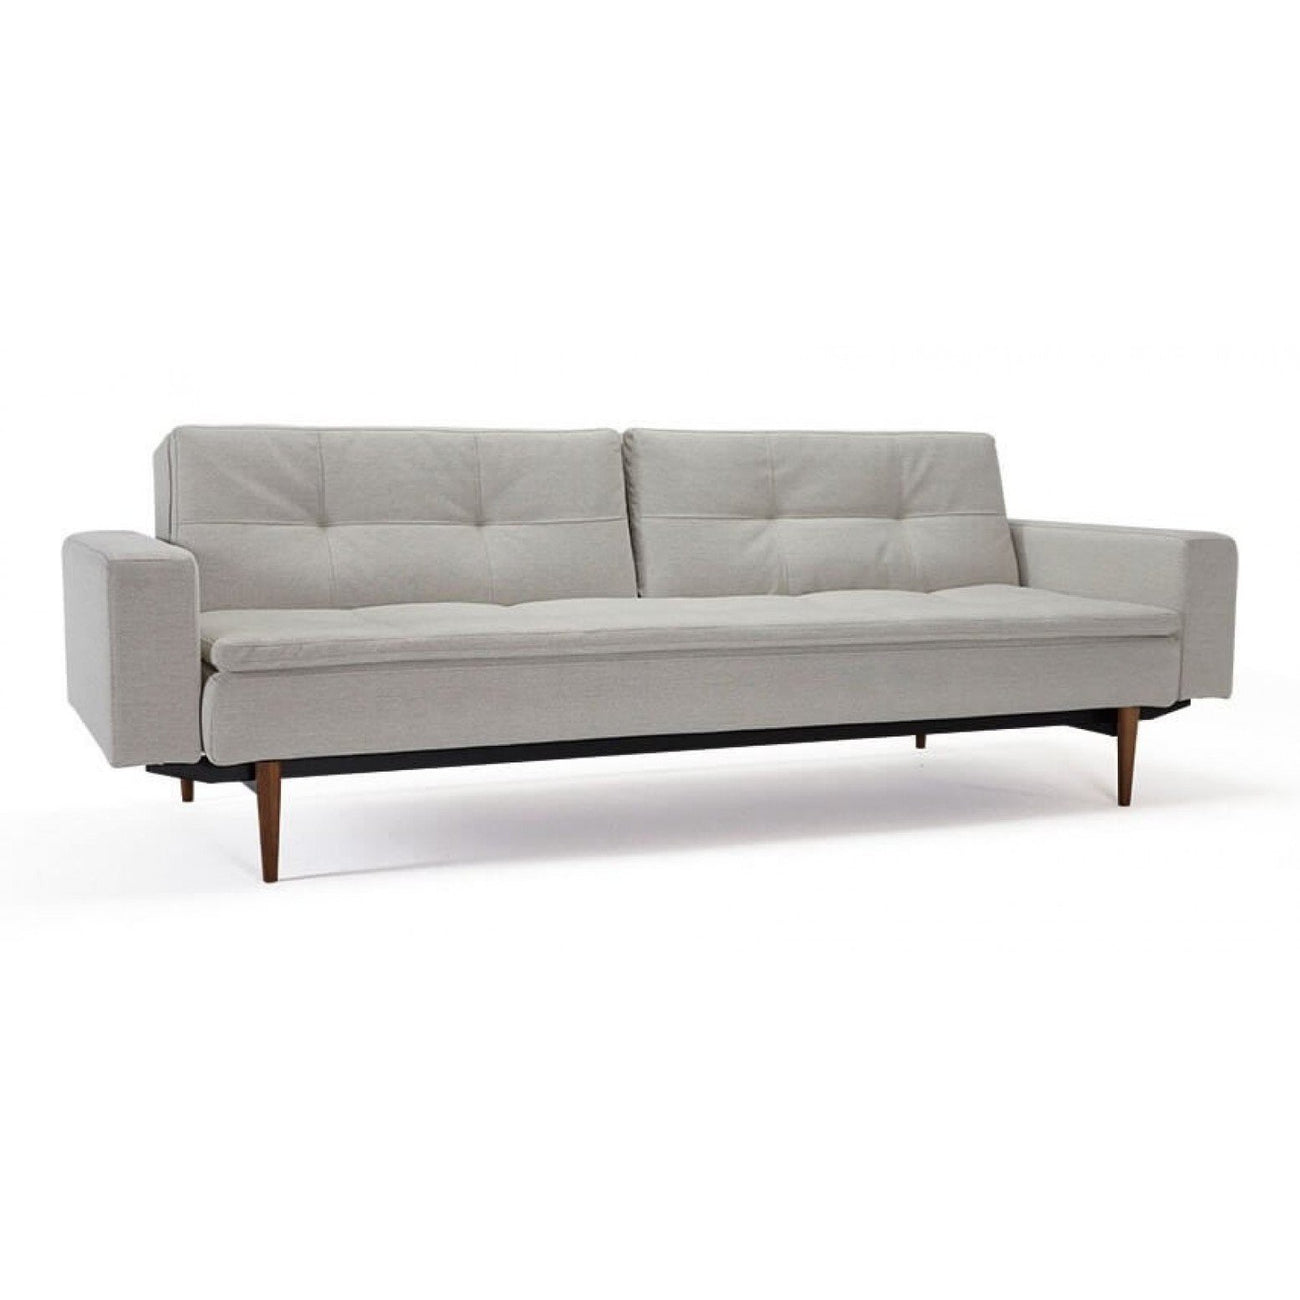 Dublexo Deluxe Sofa W/Arms,DARK WOOD-Innovation Living-INNO-94-741050020527-10-3-SofasMixed Dance Natural-1-France and Son